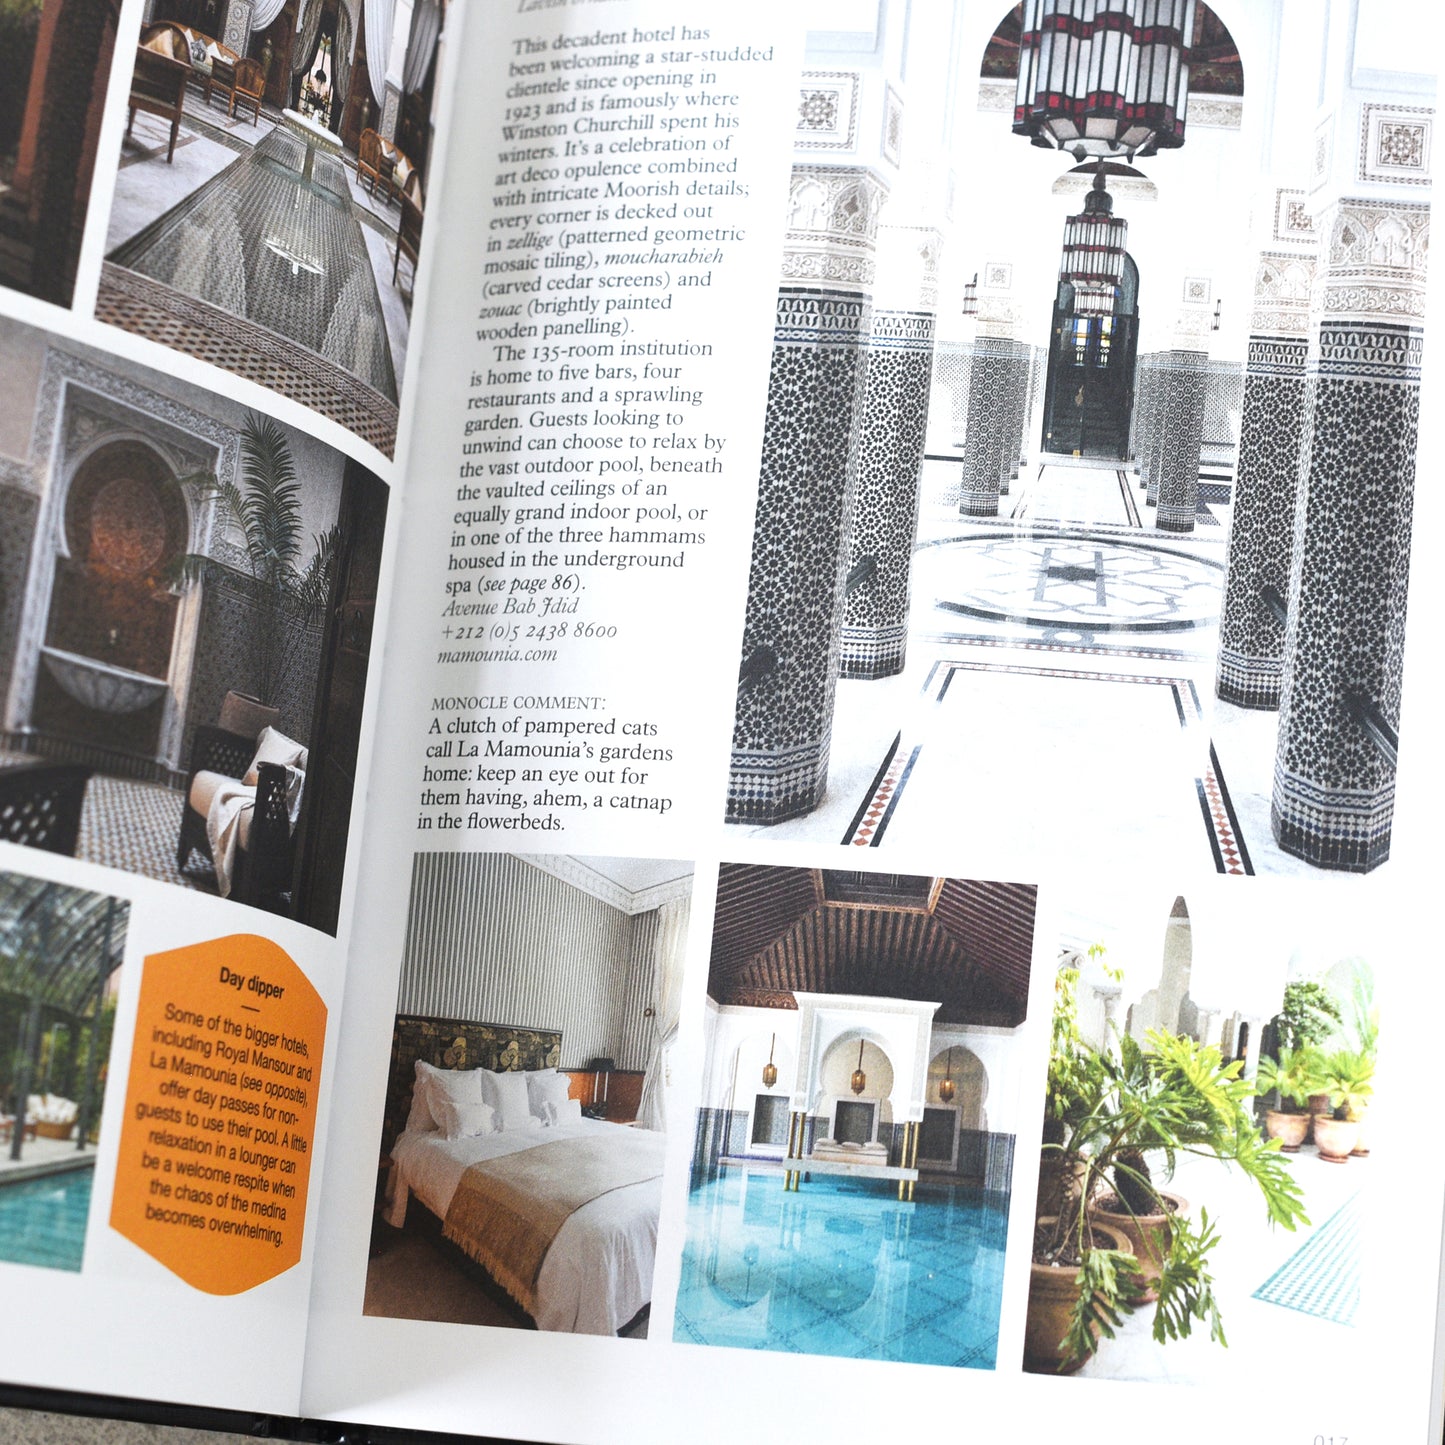 The Monocle Travel Guide Series Marrakech